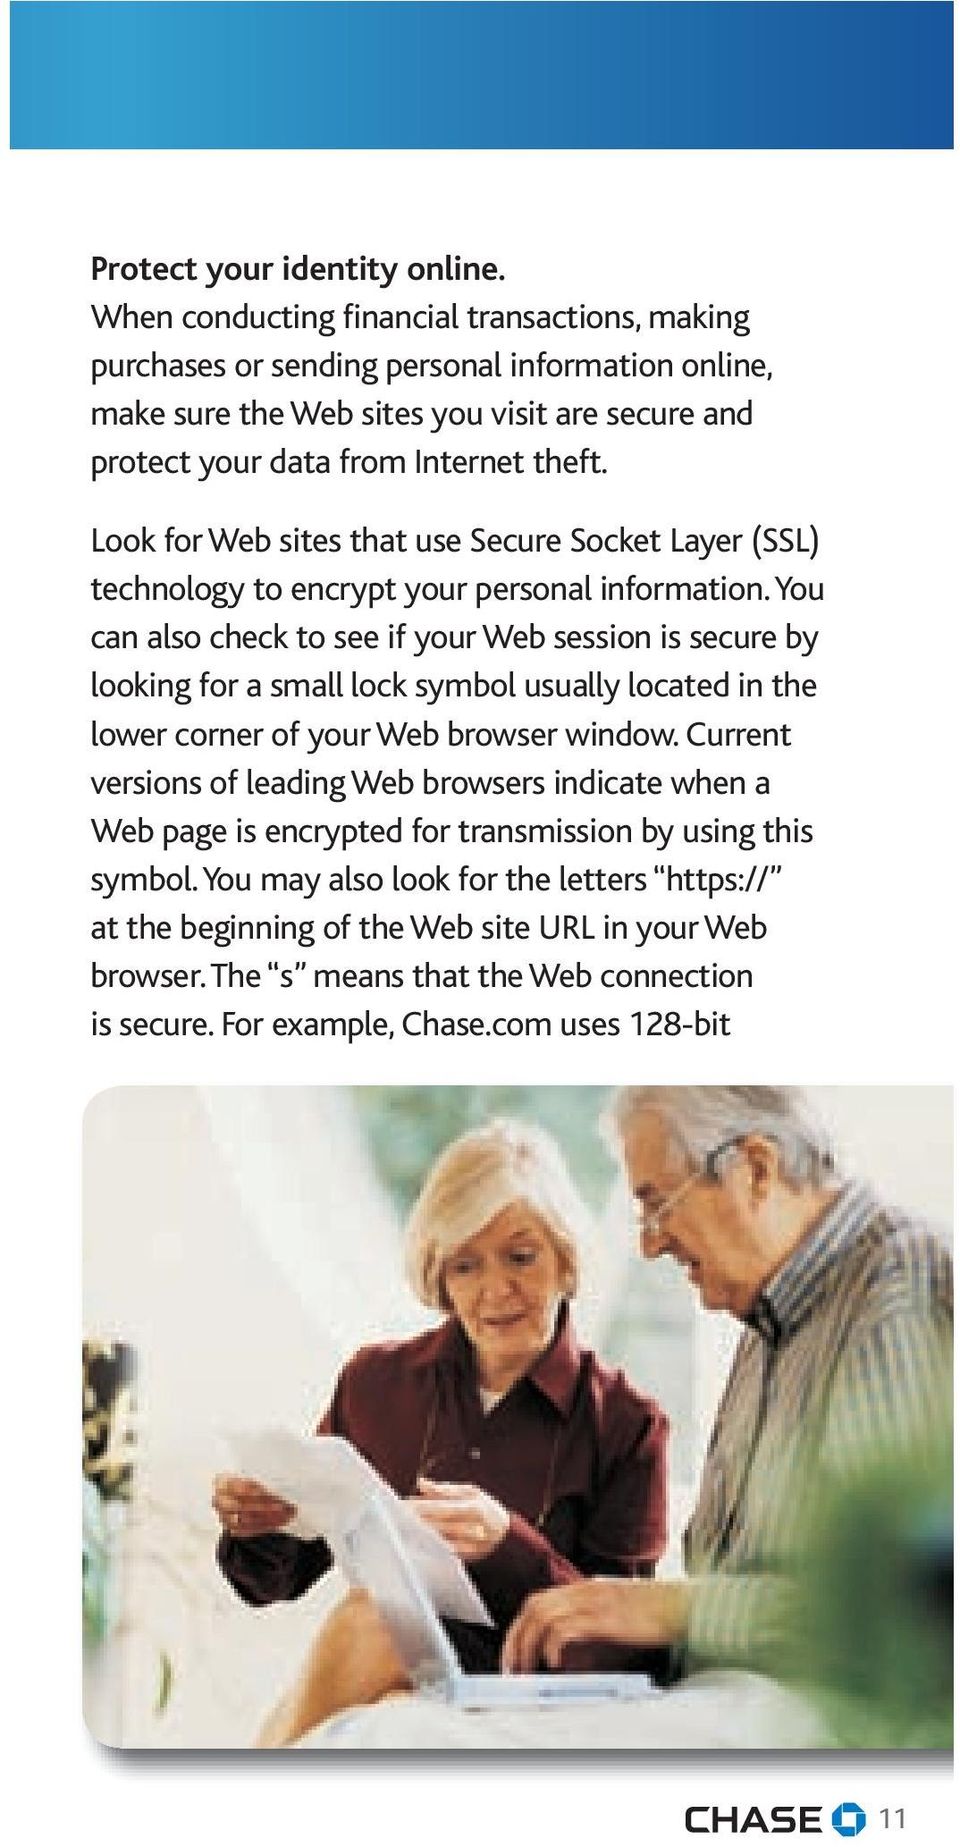 Look for Web sites that use Secure Socket Layer (SSL) technology to encrypt your personal information.